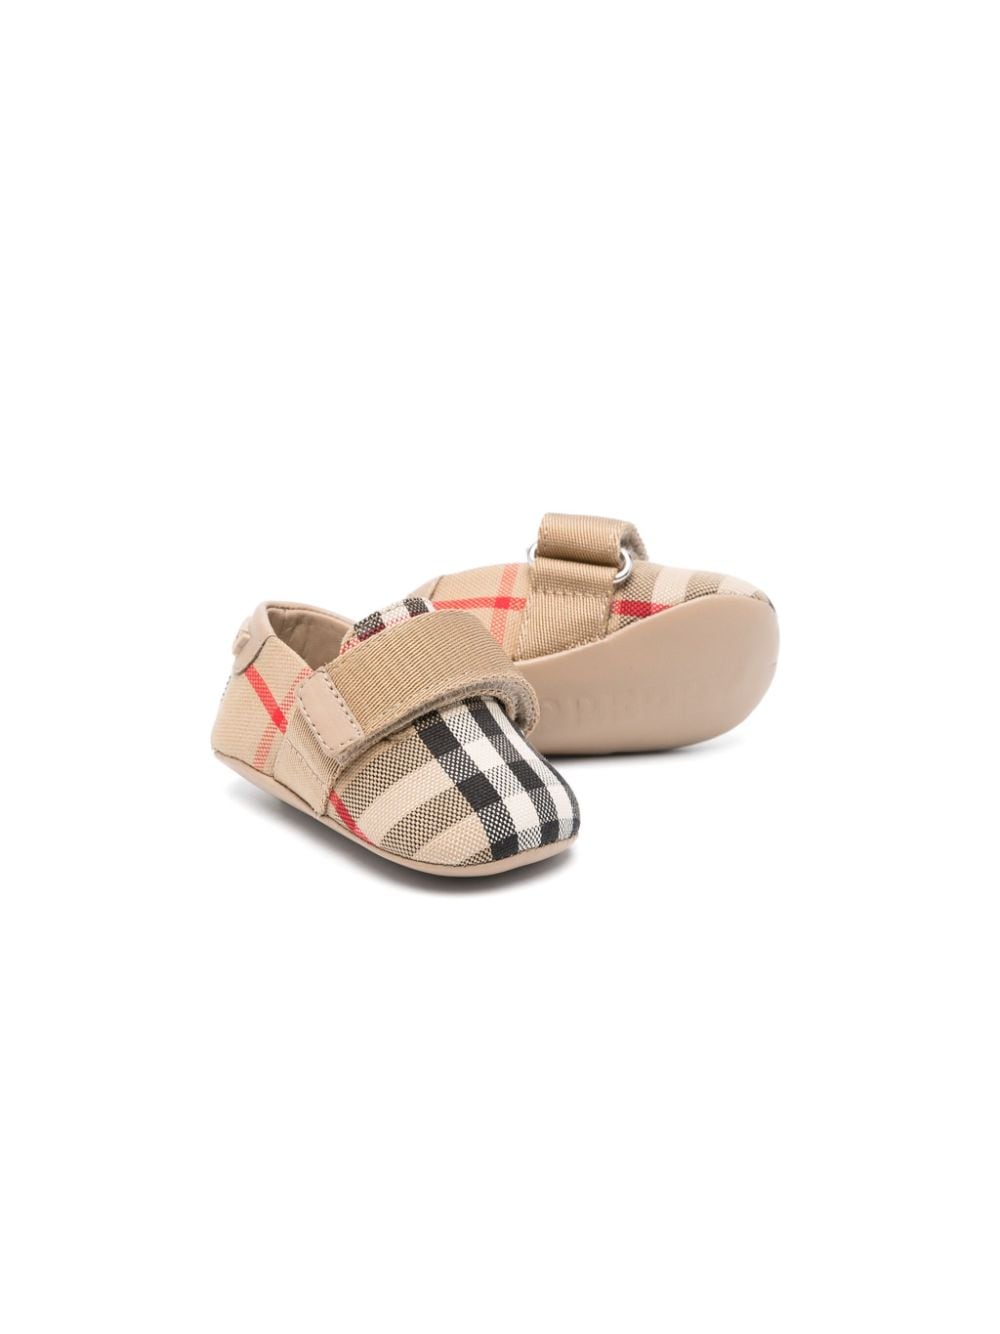 Beige shoes for baby girls